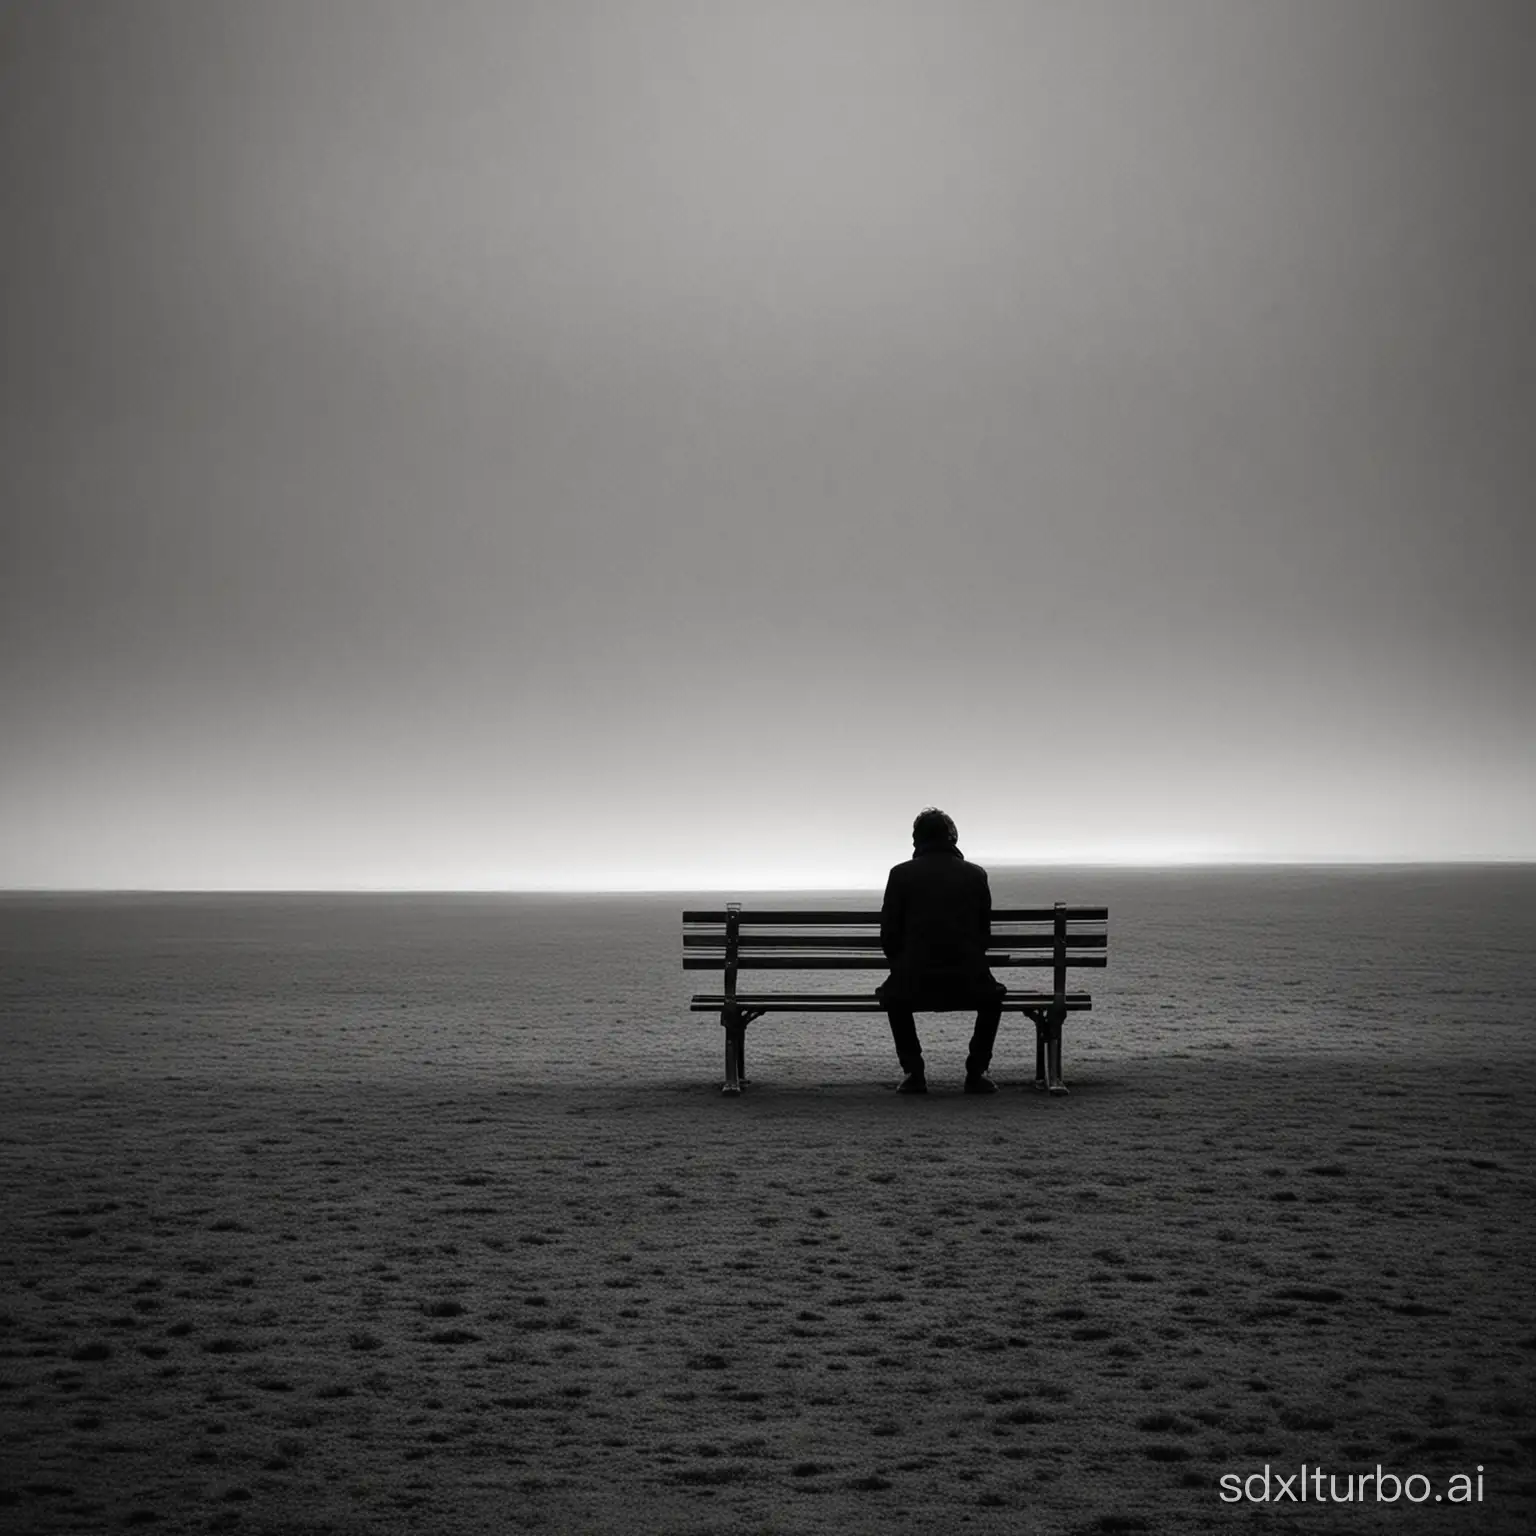 Lonely person